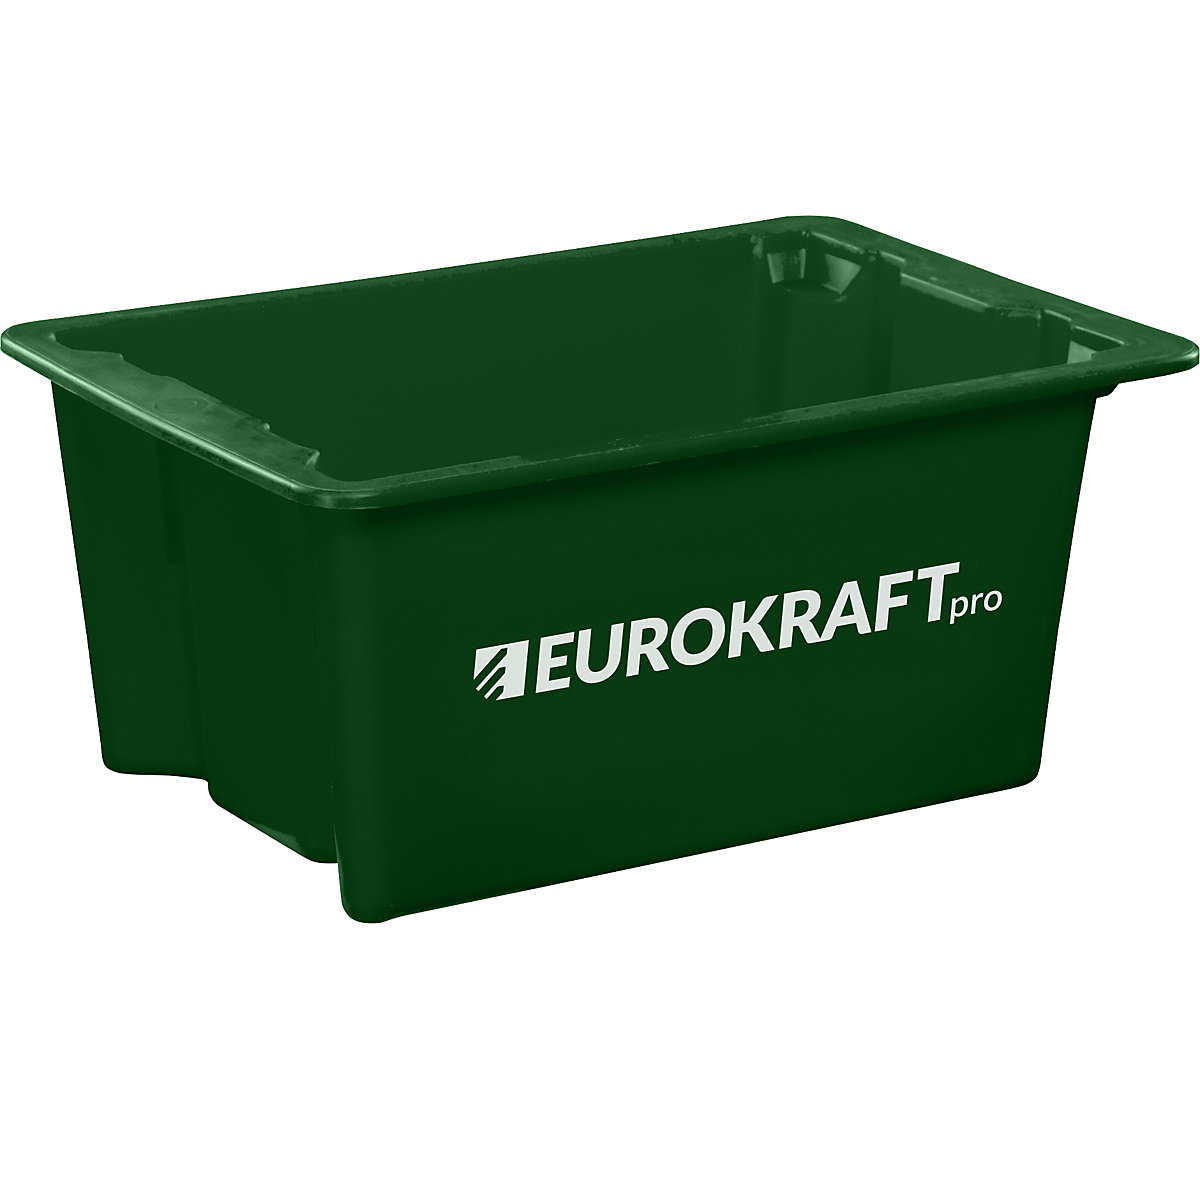 Stack/nest container made of polypropylene suitable for foodstuffs – eurokraft pro, 6 l capacity, pack of 4, solid walls and base, green